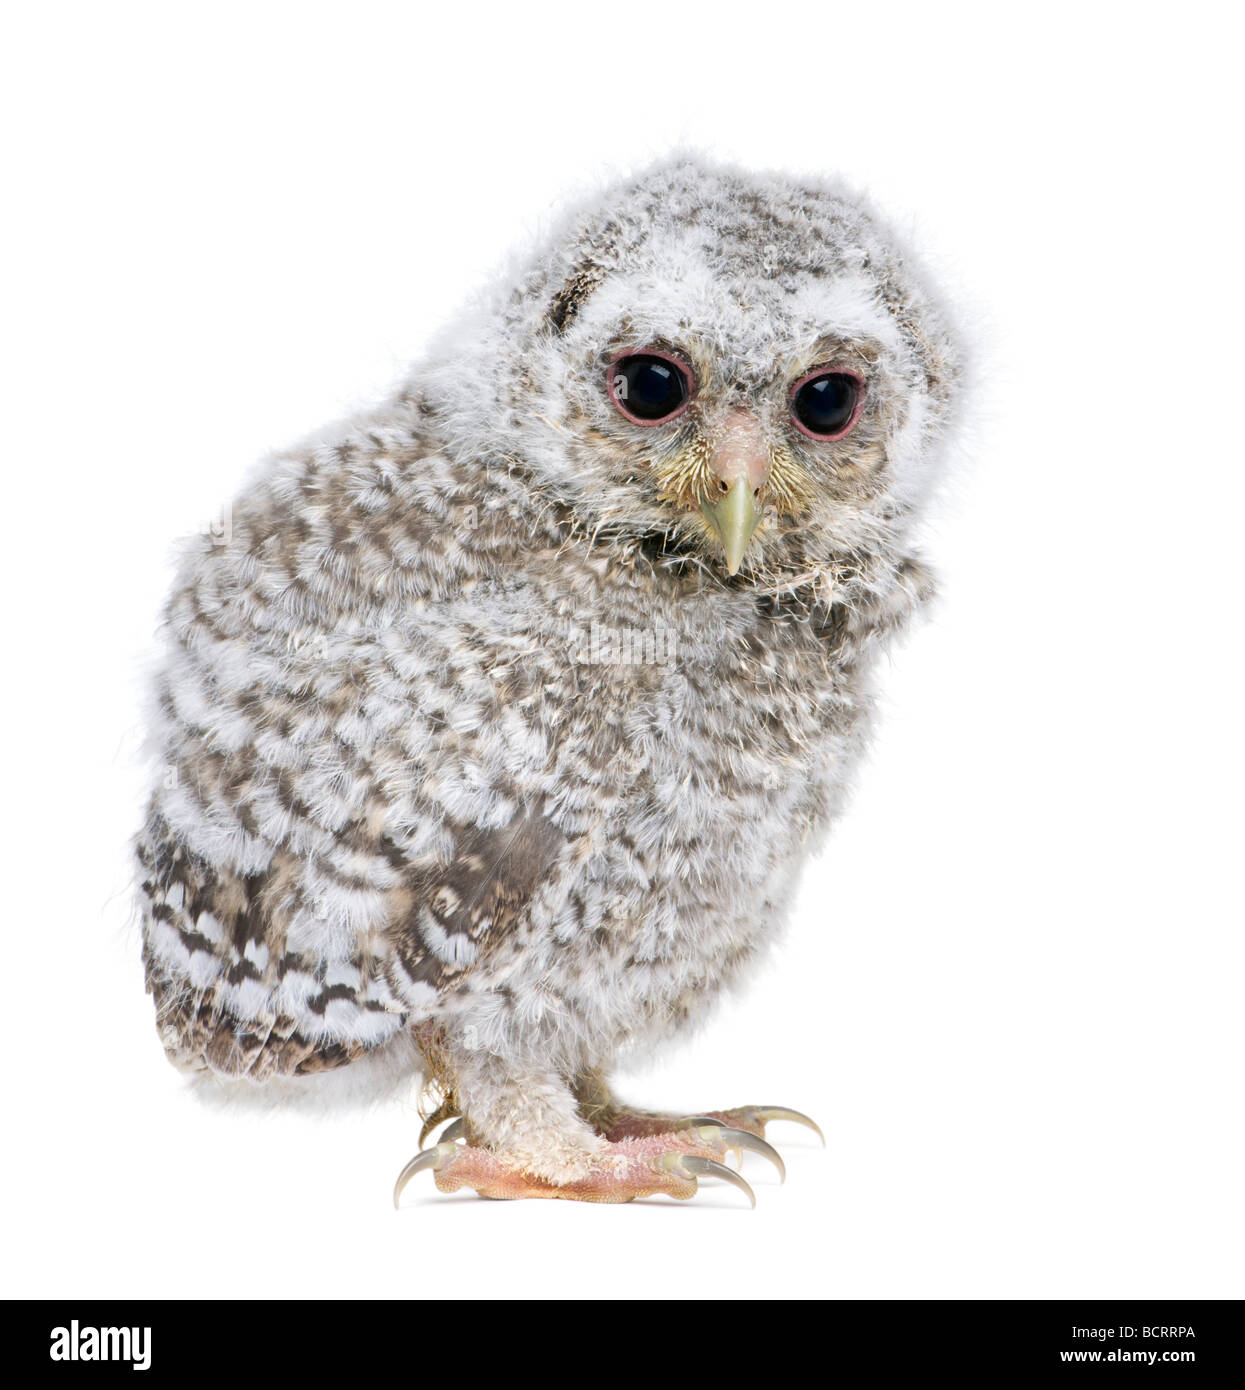 Owlet, Athene noctua, 4 weeks old, in front of a white background, studio shot Stock Photo